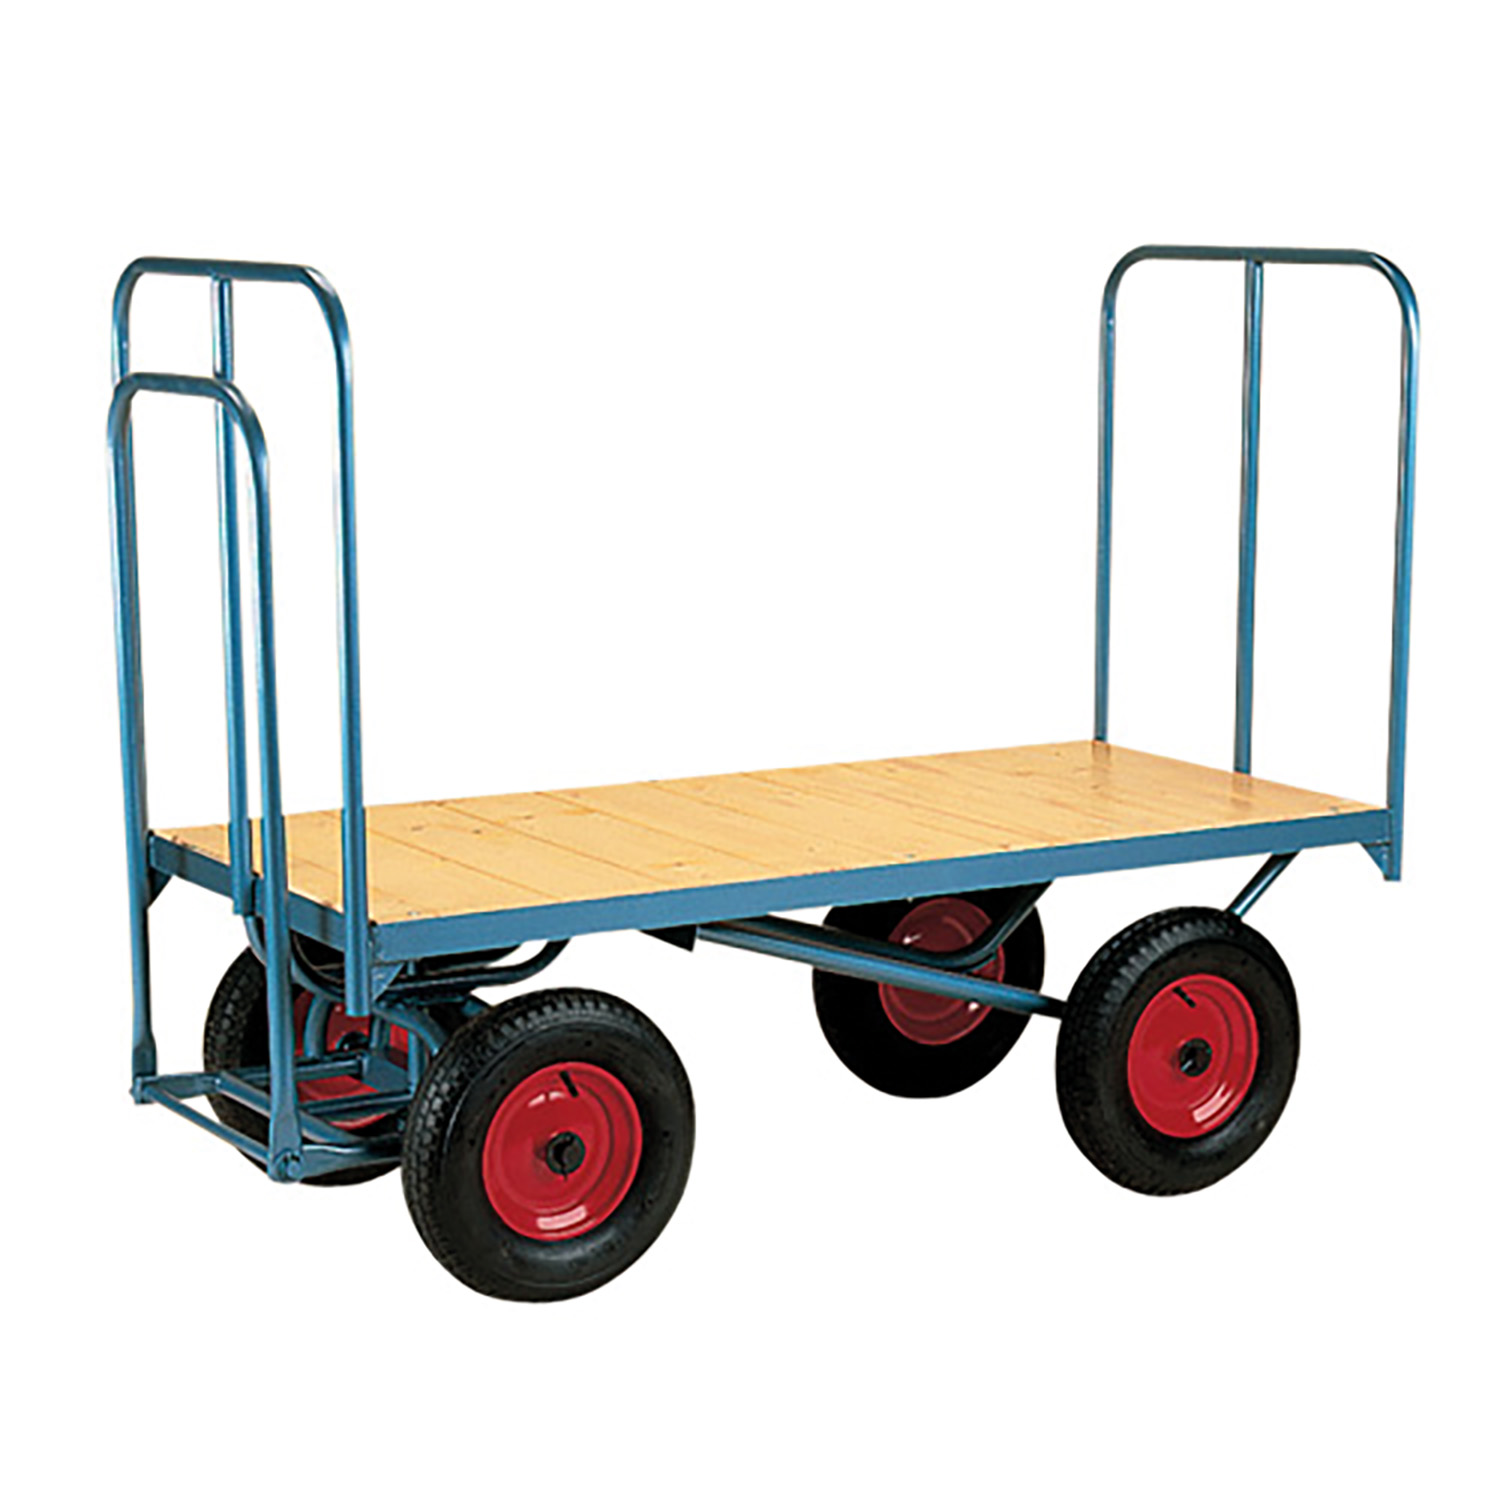 STUBBS FOUR WHEEL HIGH ENDED TROLLEY S2109ES